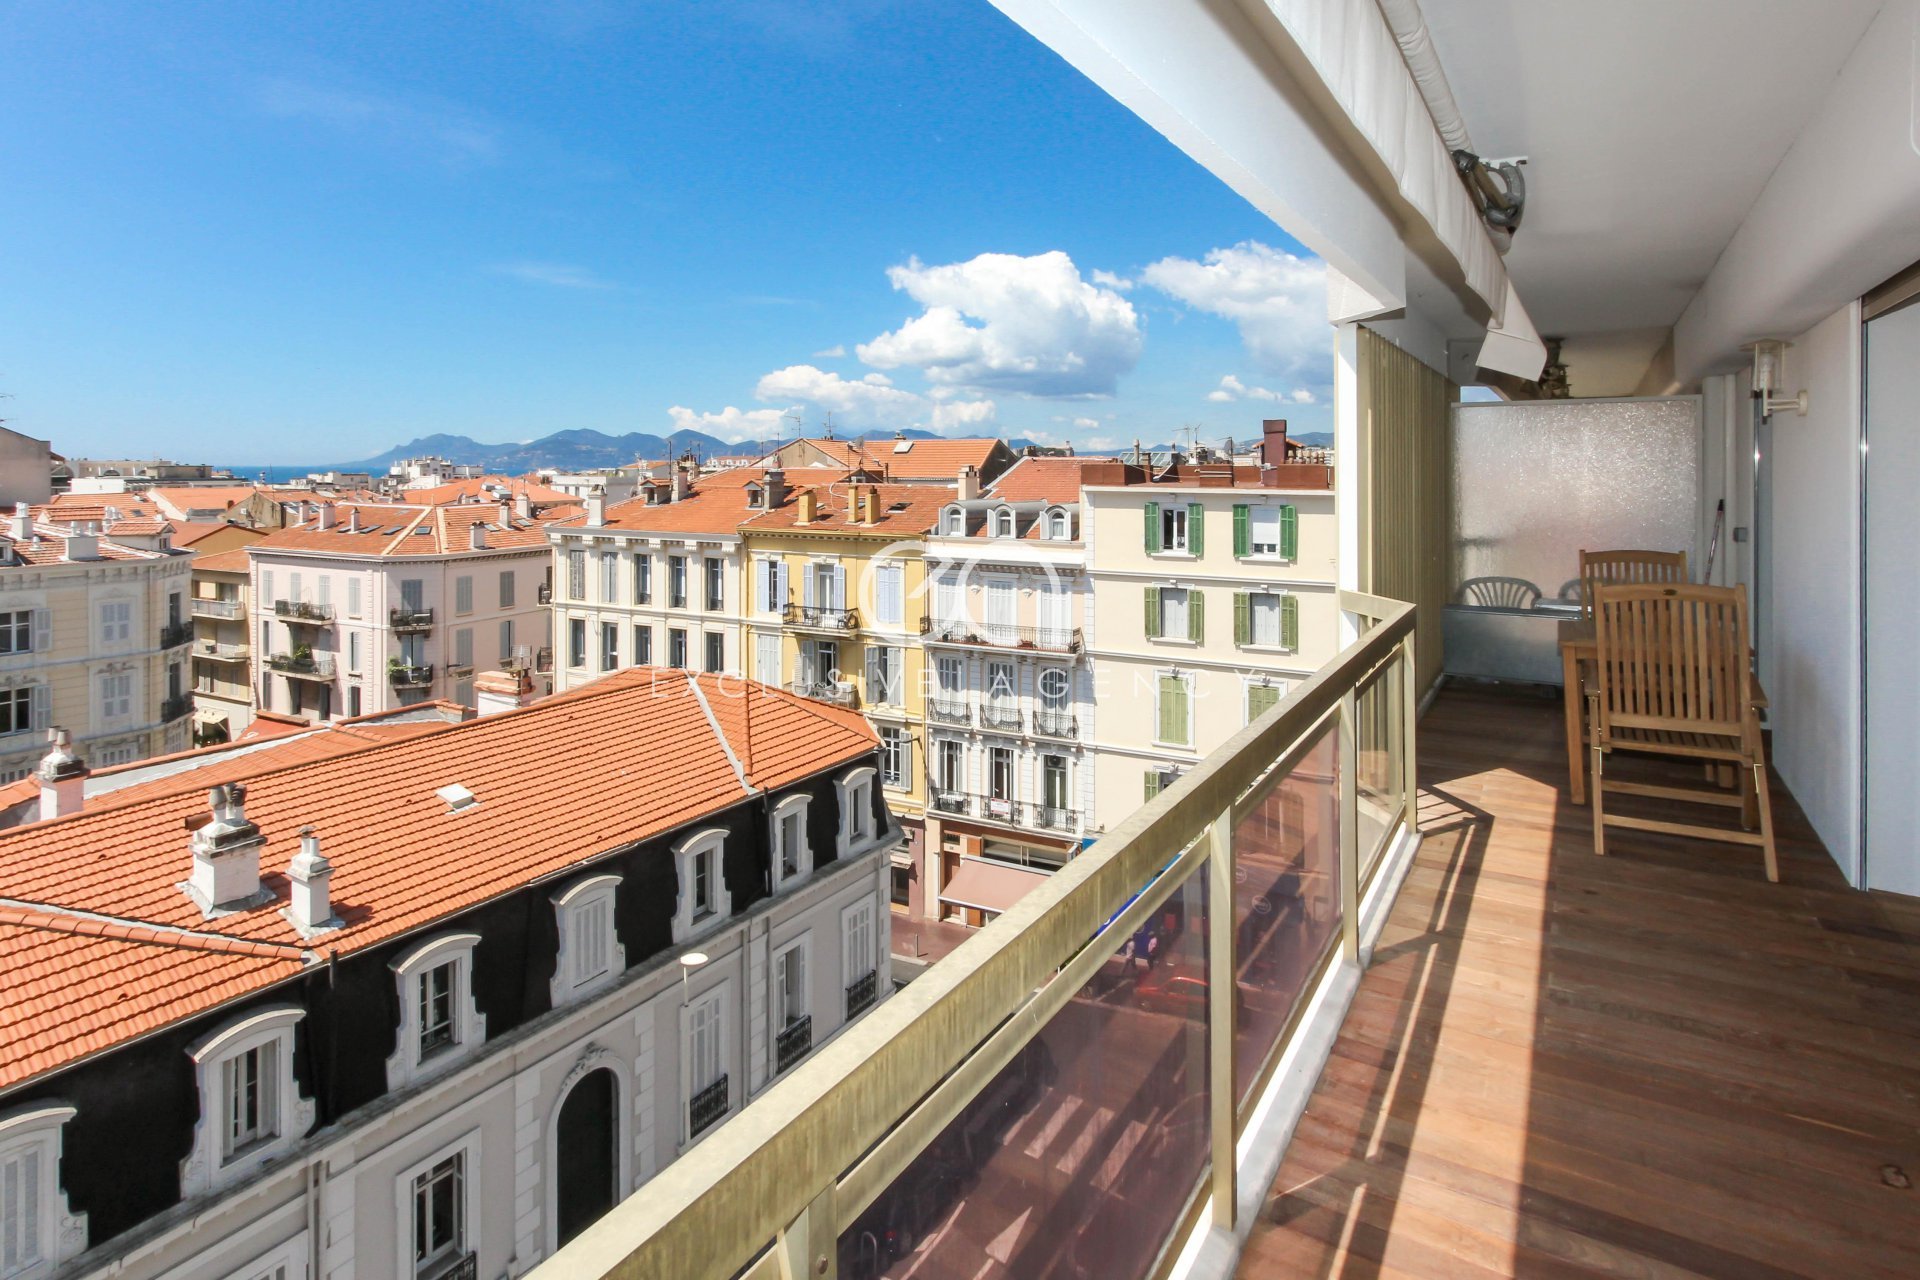 Cannes City Center rental for congress or holiday 50m² 1 bedroom apartment.